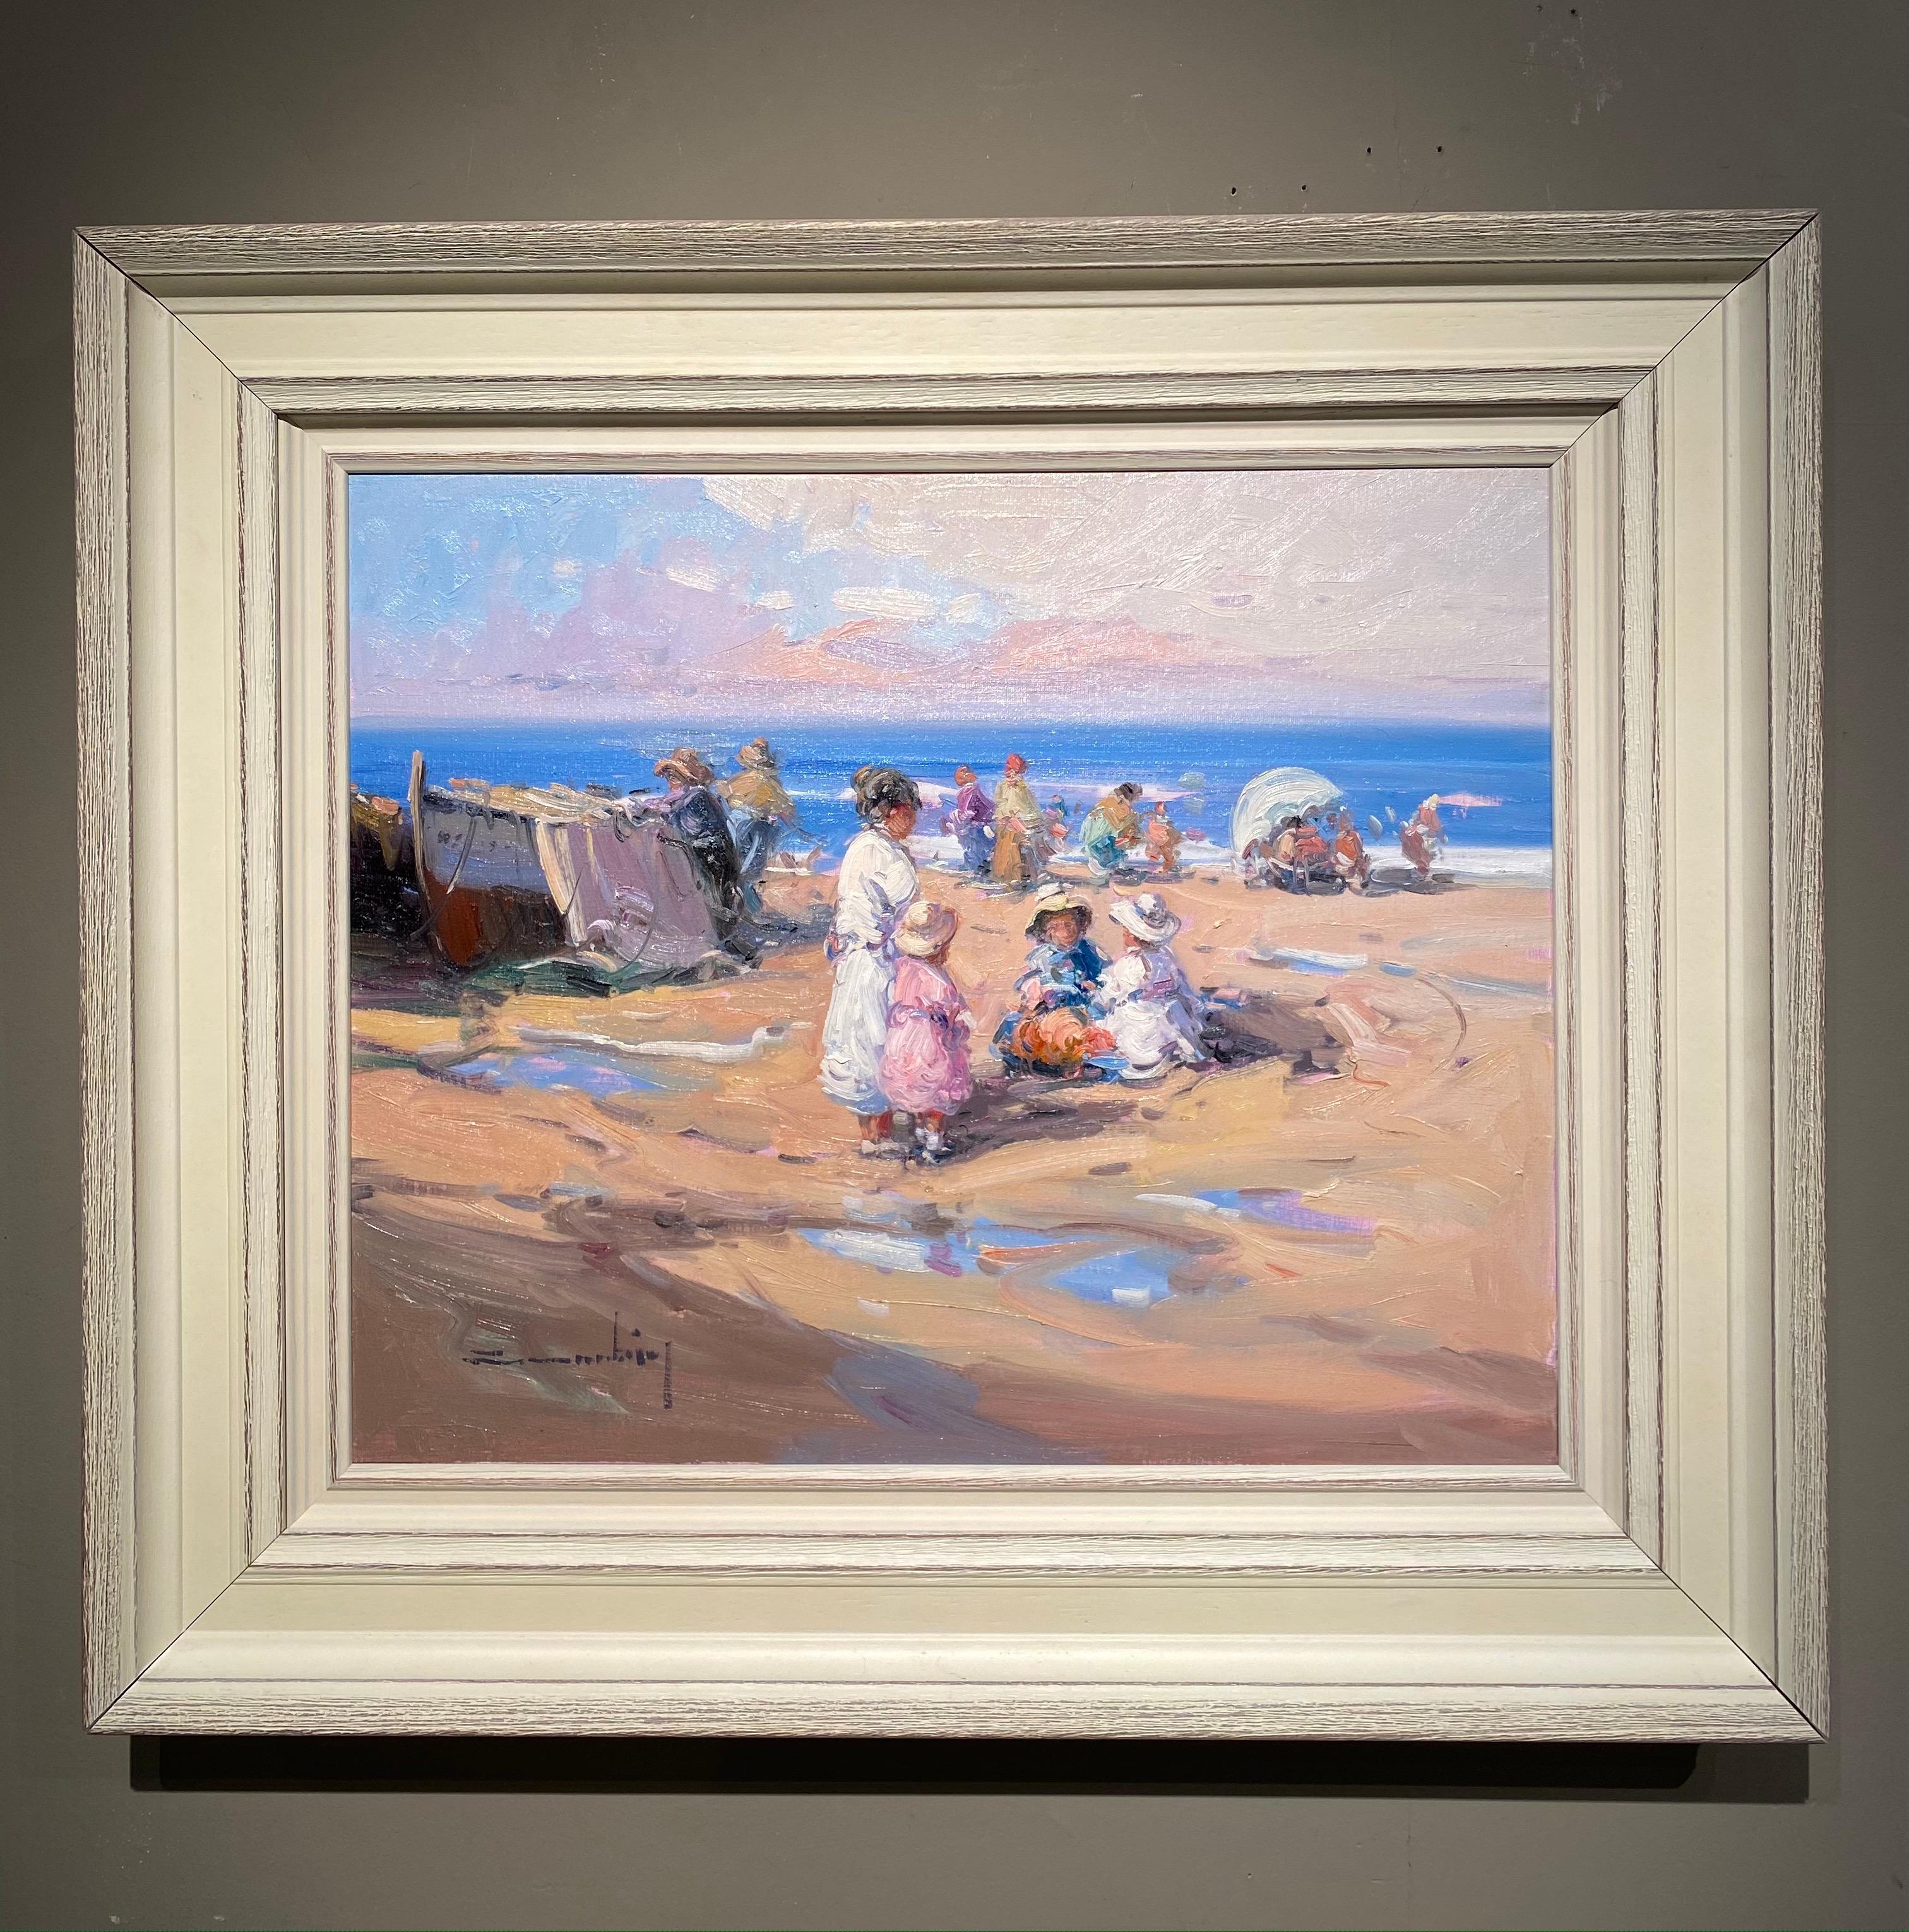 'A Moment in Time' Contemporary Beach Landscape Painting with Figures, children